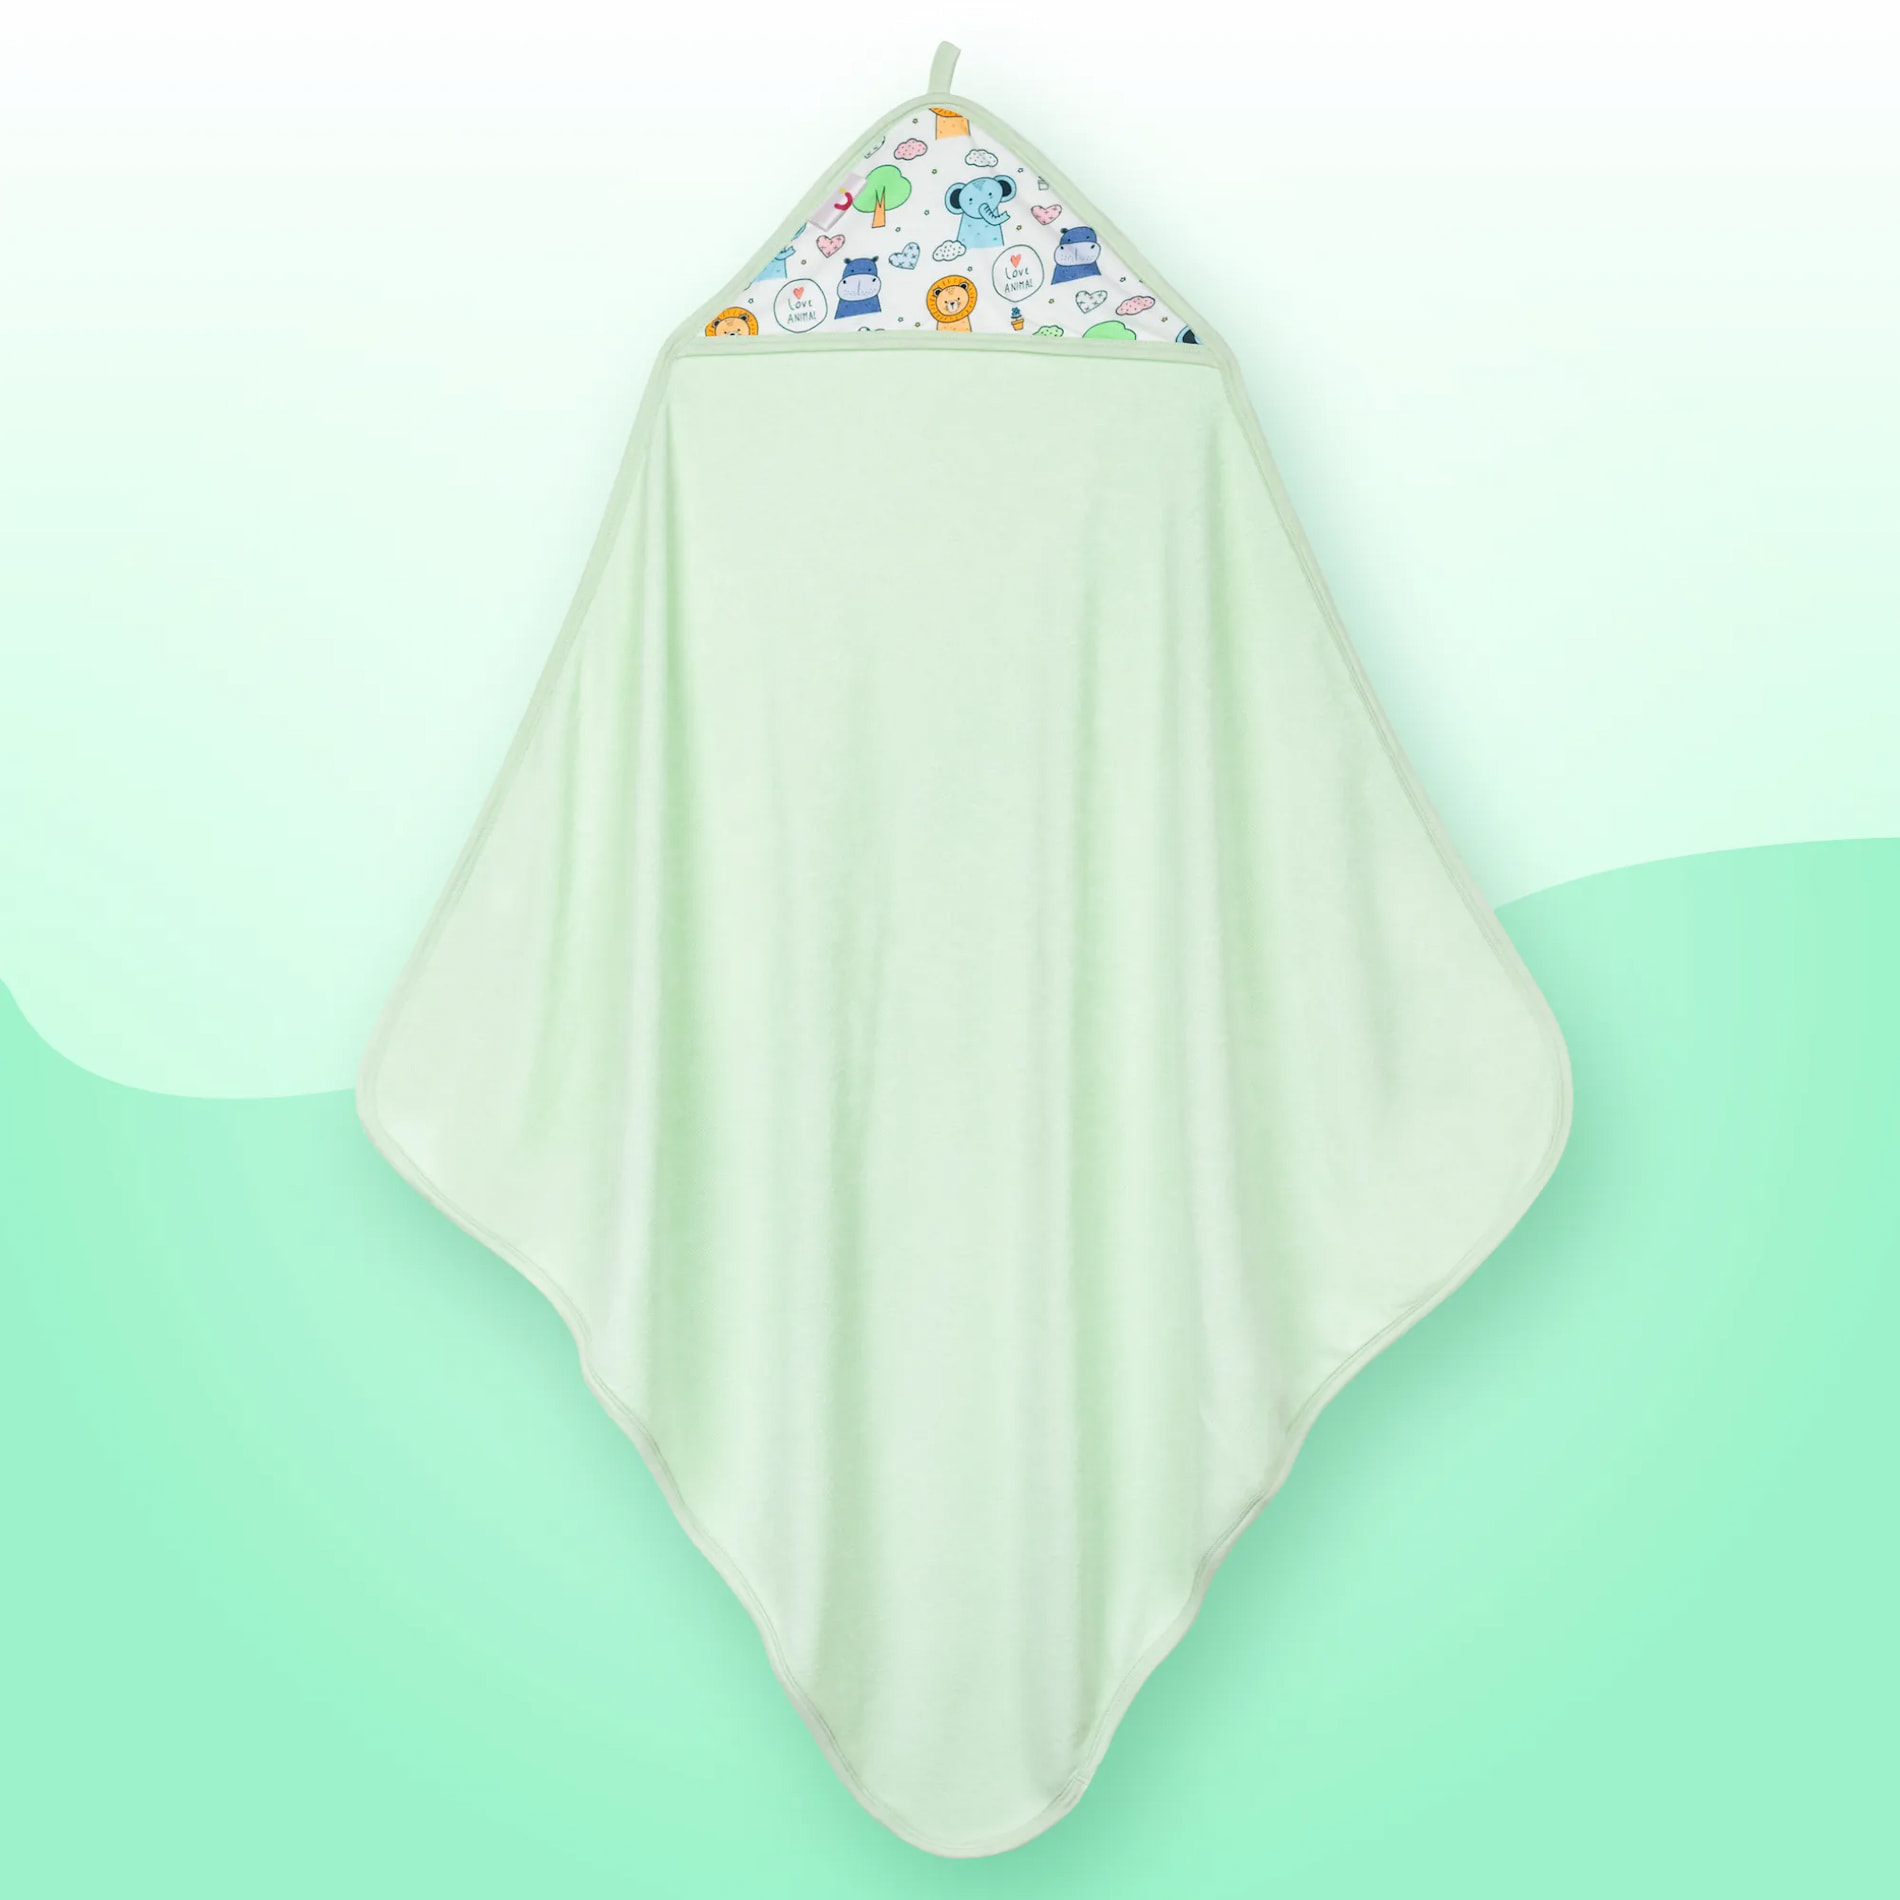 Baby Hooded Towel | Soft, Lightweight & Extra Absorbent |Keeps Baby Snug | Dries 3x Faster than Cotton | Baby Safari - Mint Green (78 cm x 78cm)